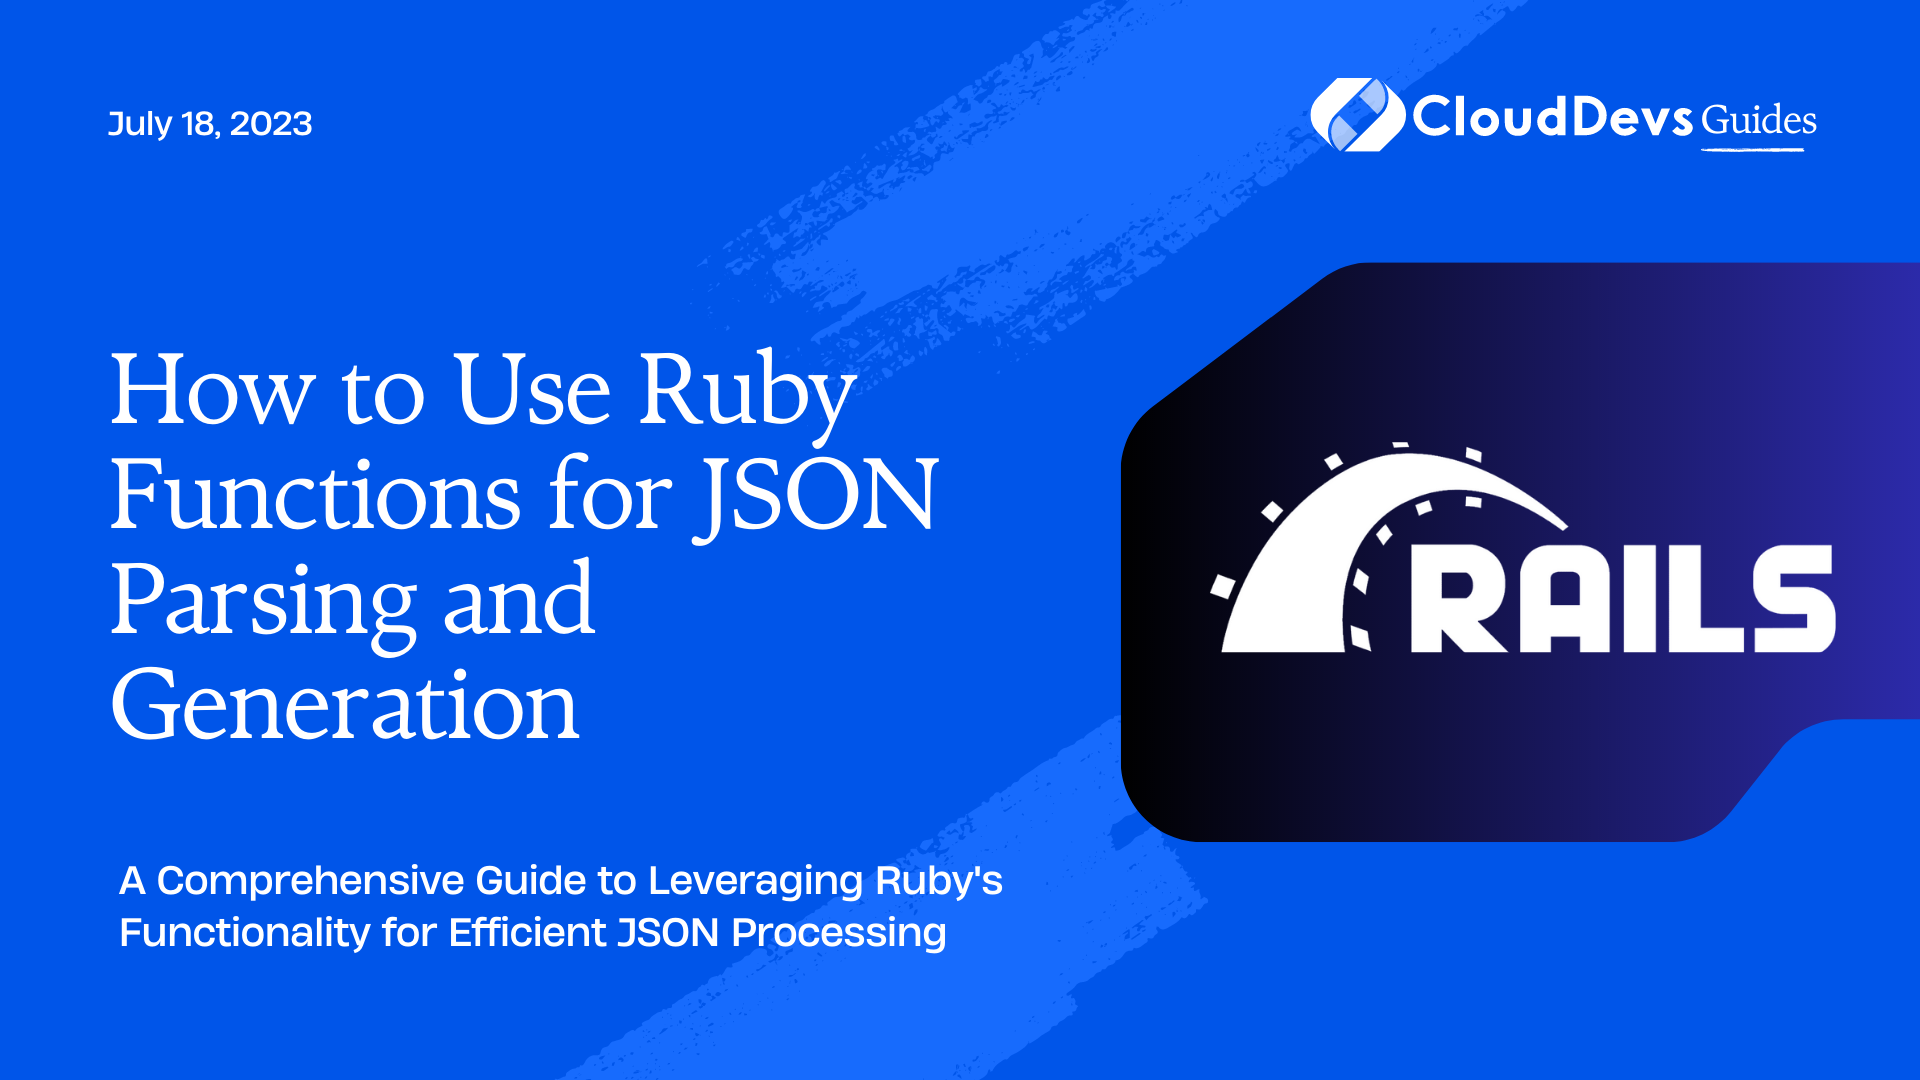 How to Use Ruby Functions for JSON Parsing and Generation